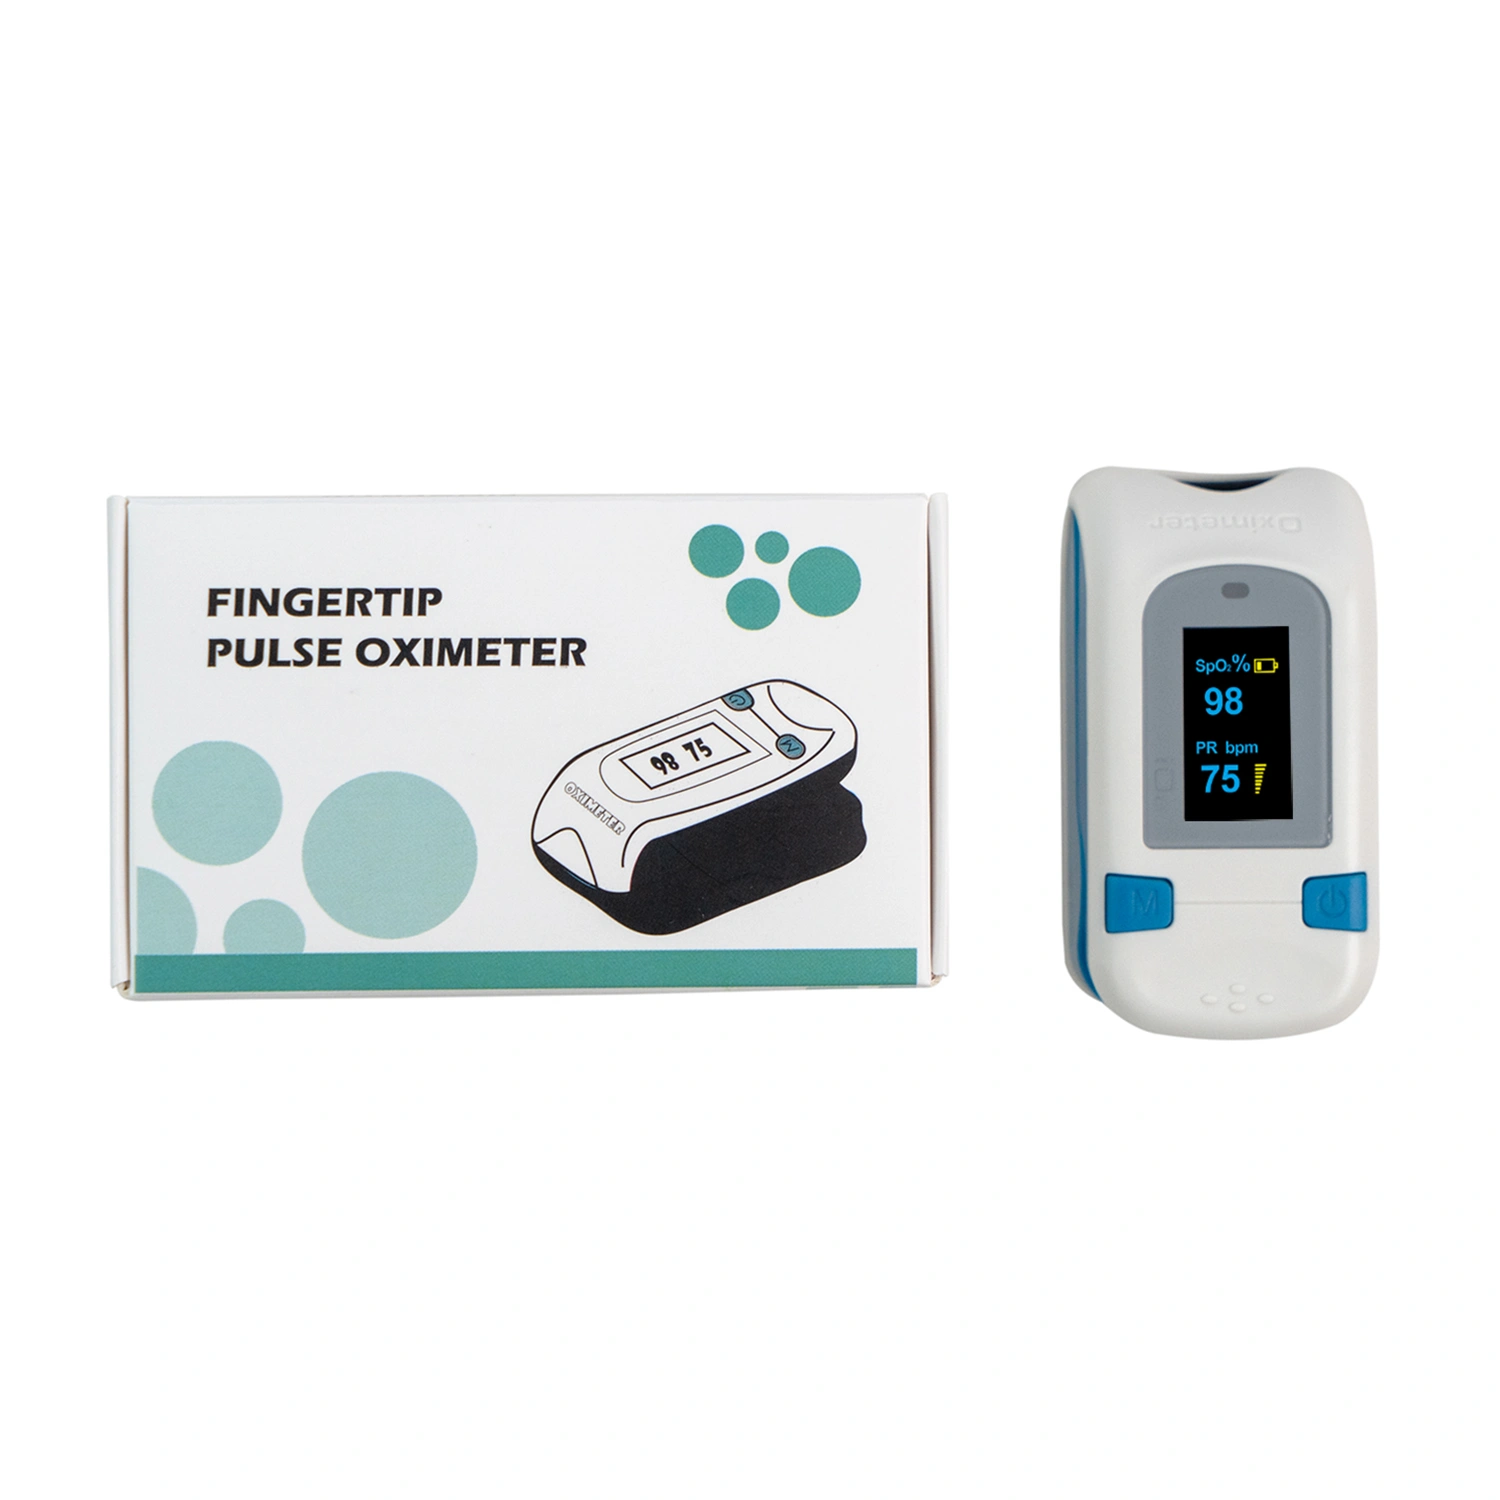 How to use the fingertip oximeter correctly